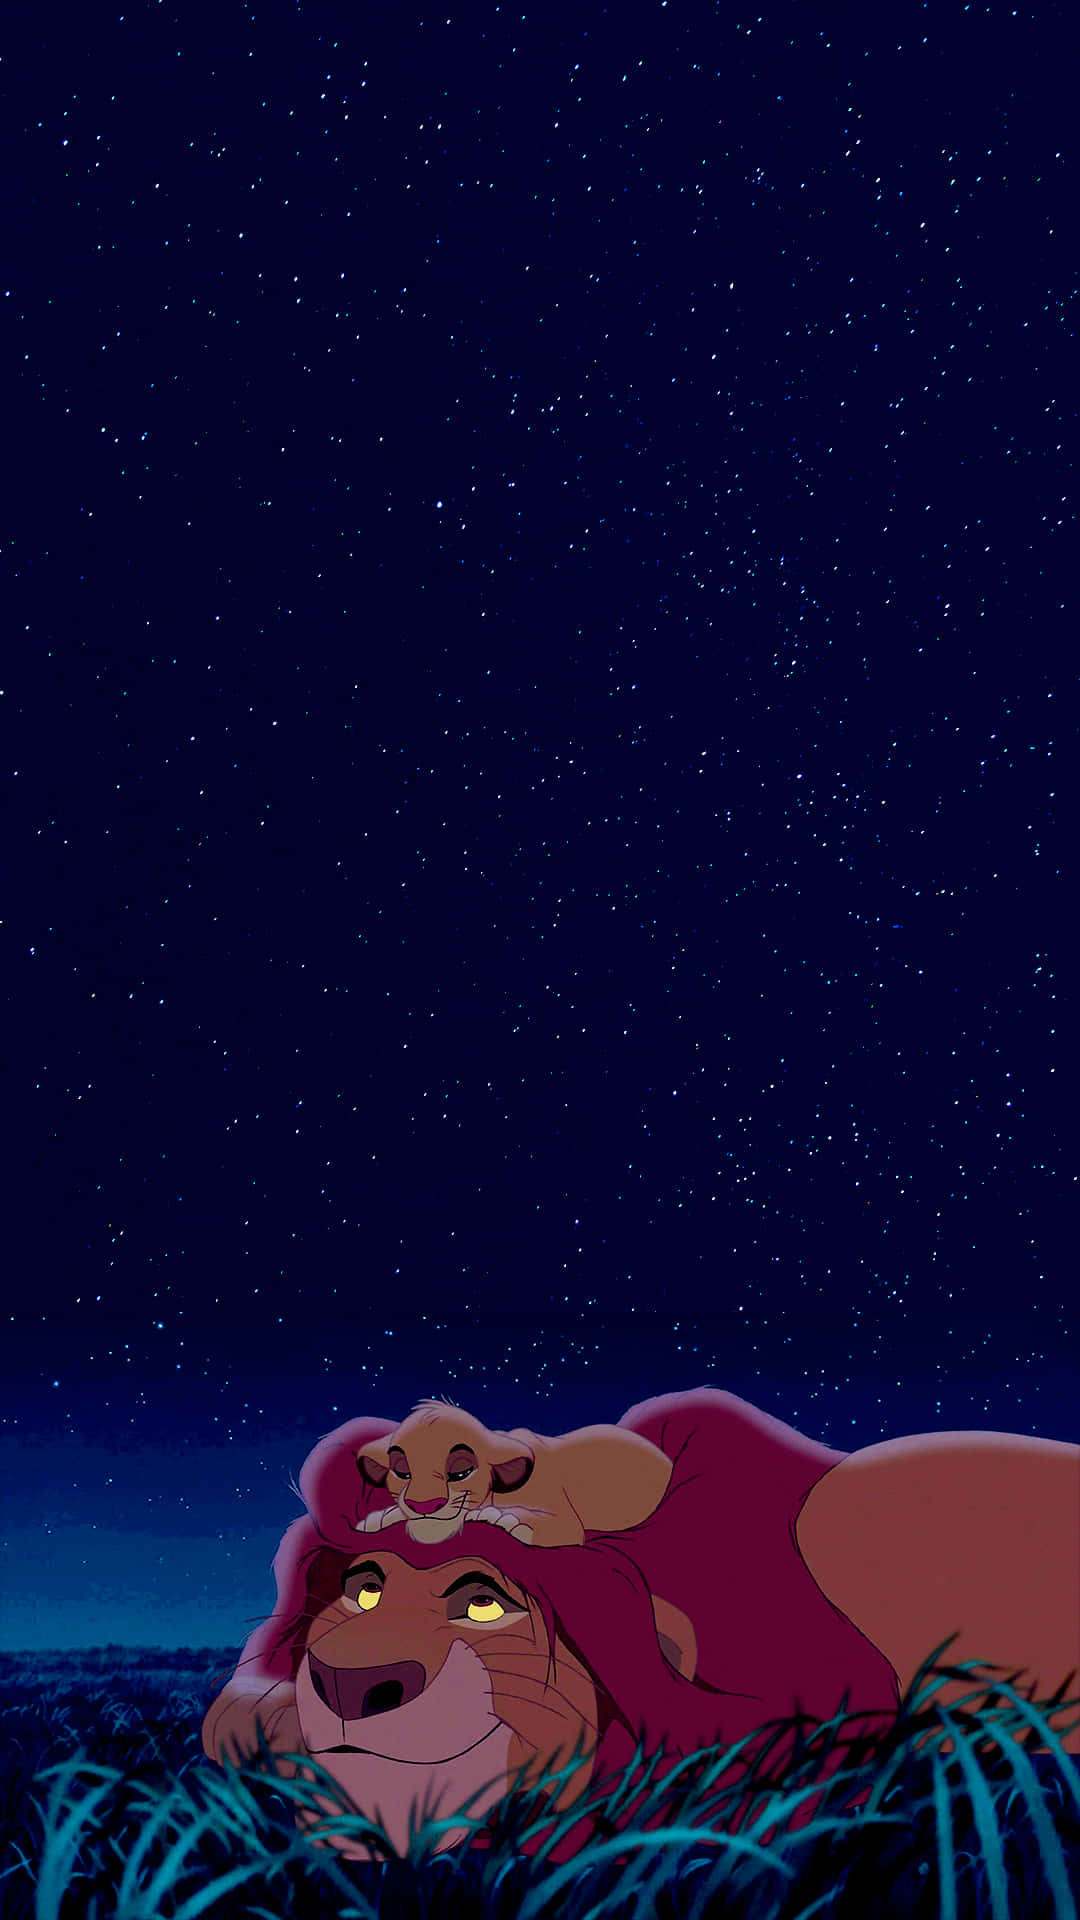 Lion King Aesthetic – Feel the Majesty of Nature Wallpaper